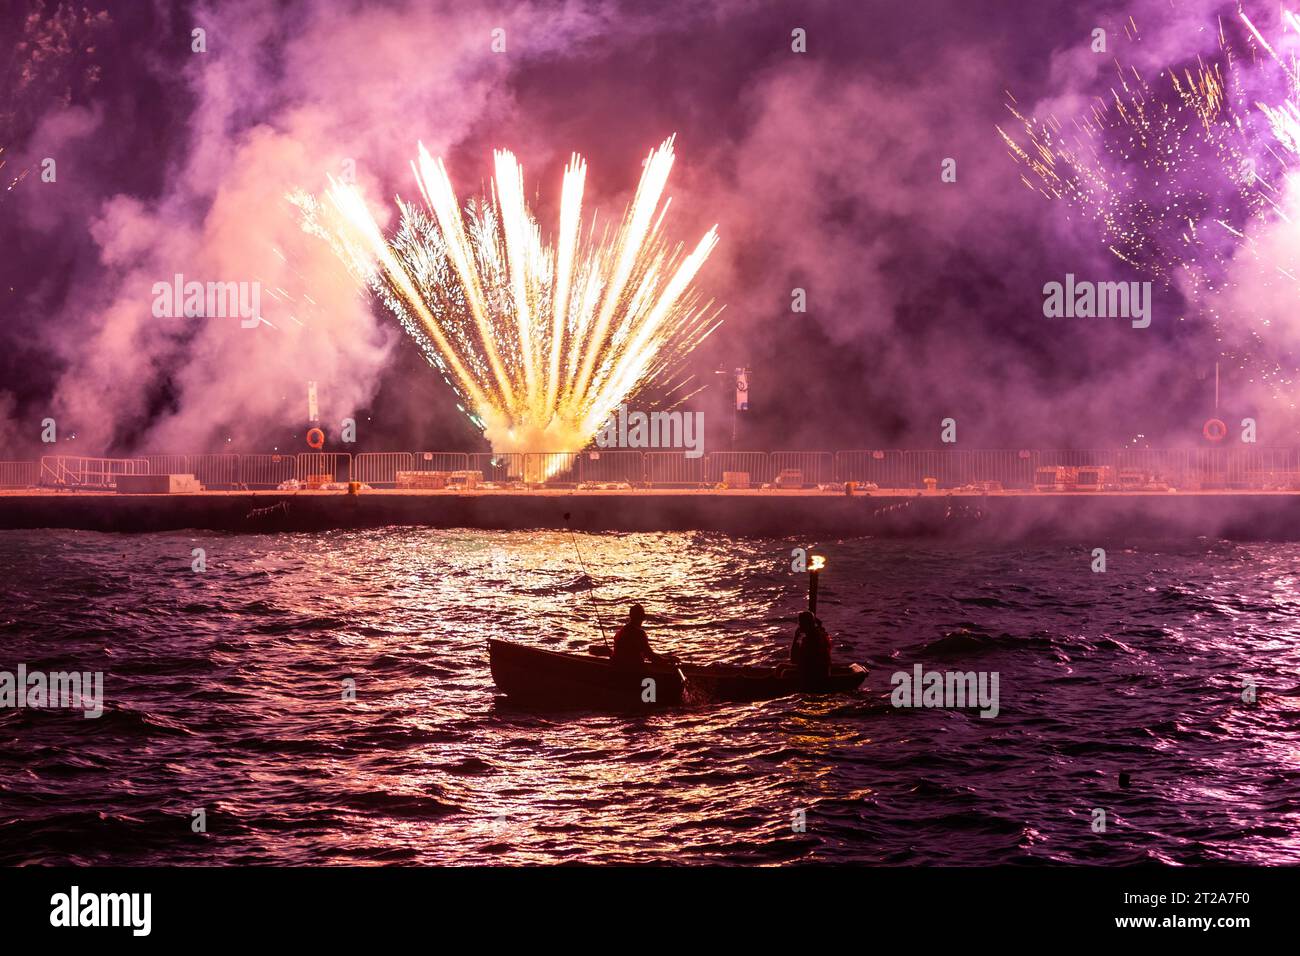 Amazing fireworks during the festivities of the Armata, a local annual custom in Spetses island, Greece, Europe, which represents a naval battle. Stock Photo